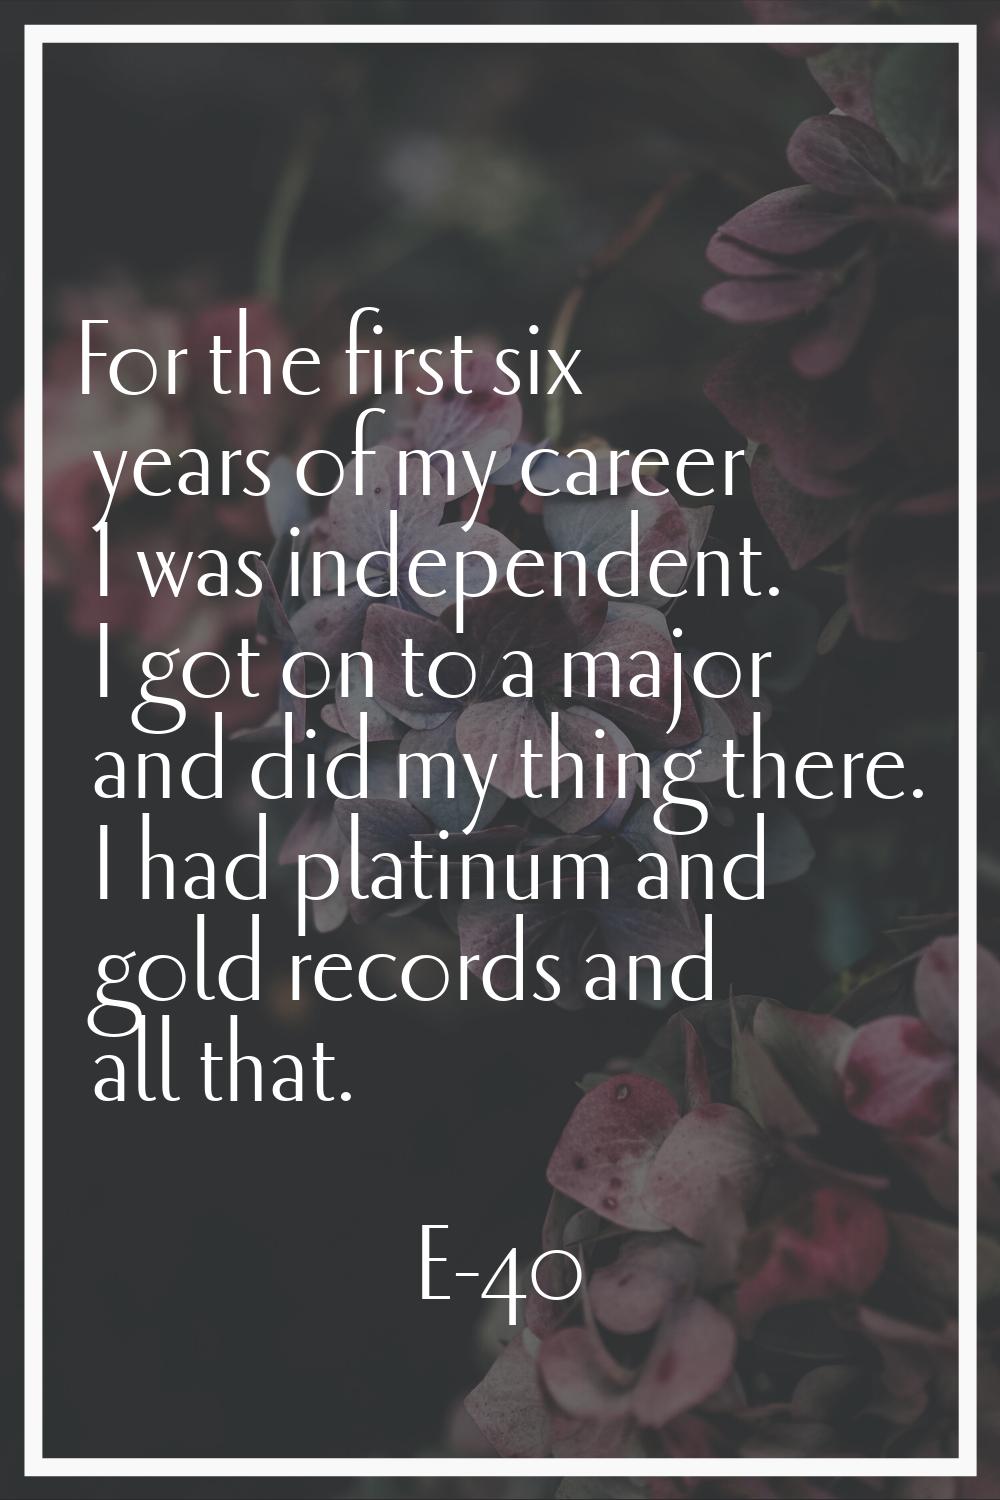 For the first six years of my career I was independent. I got on to a major and did my thing there.